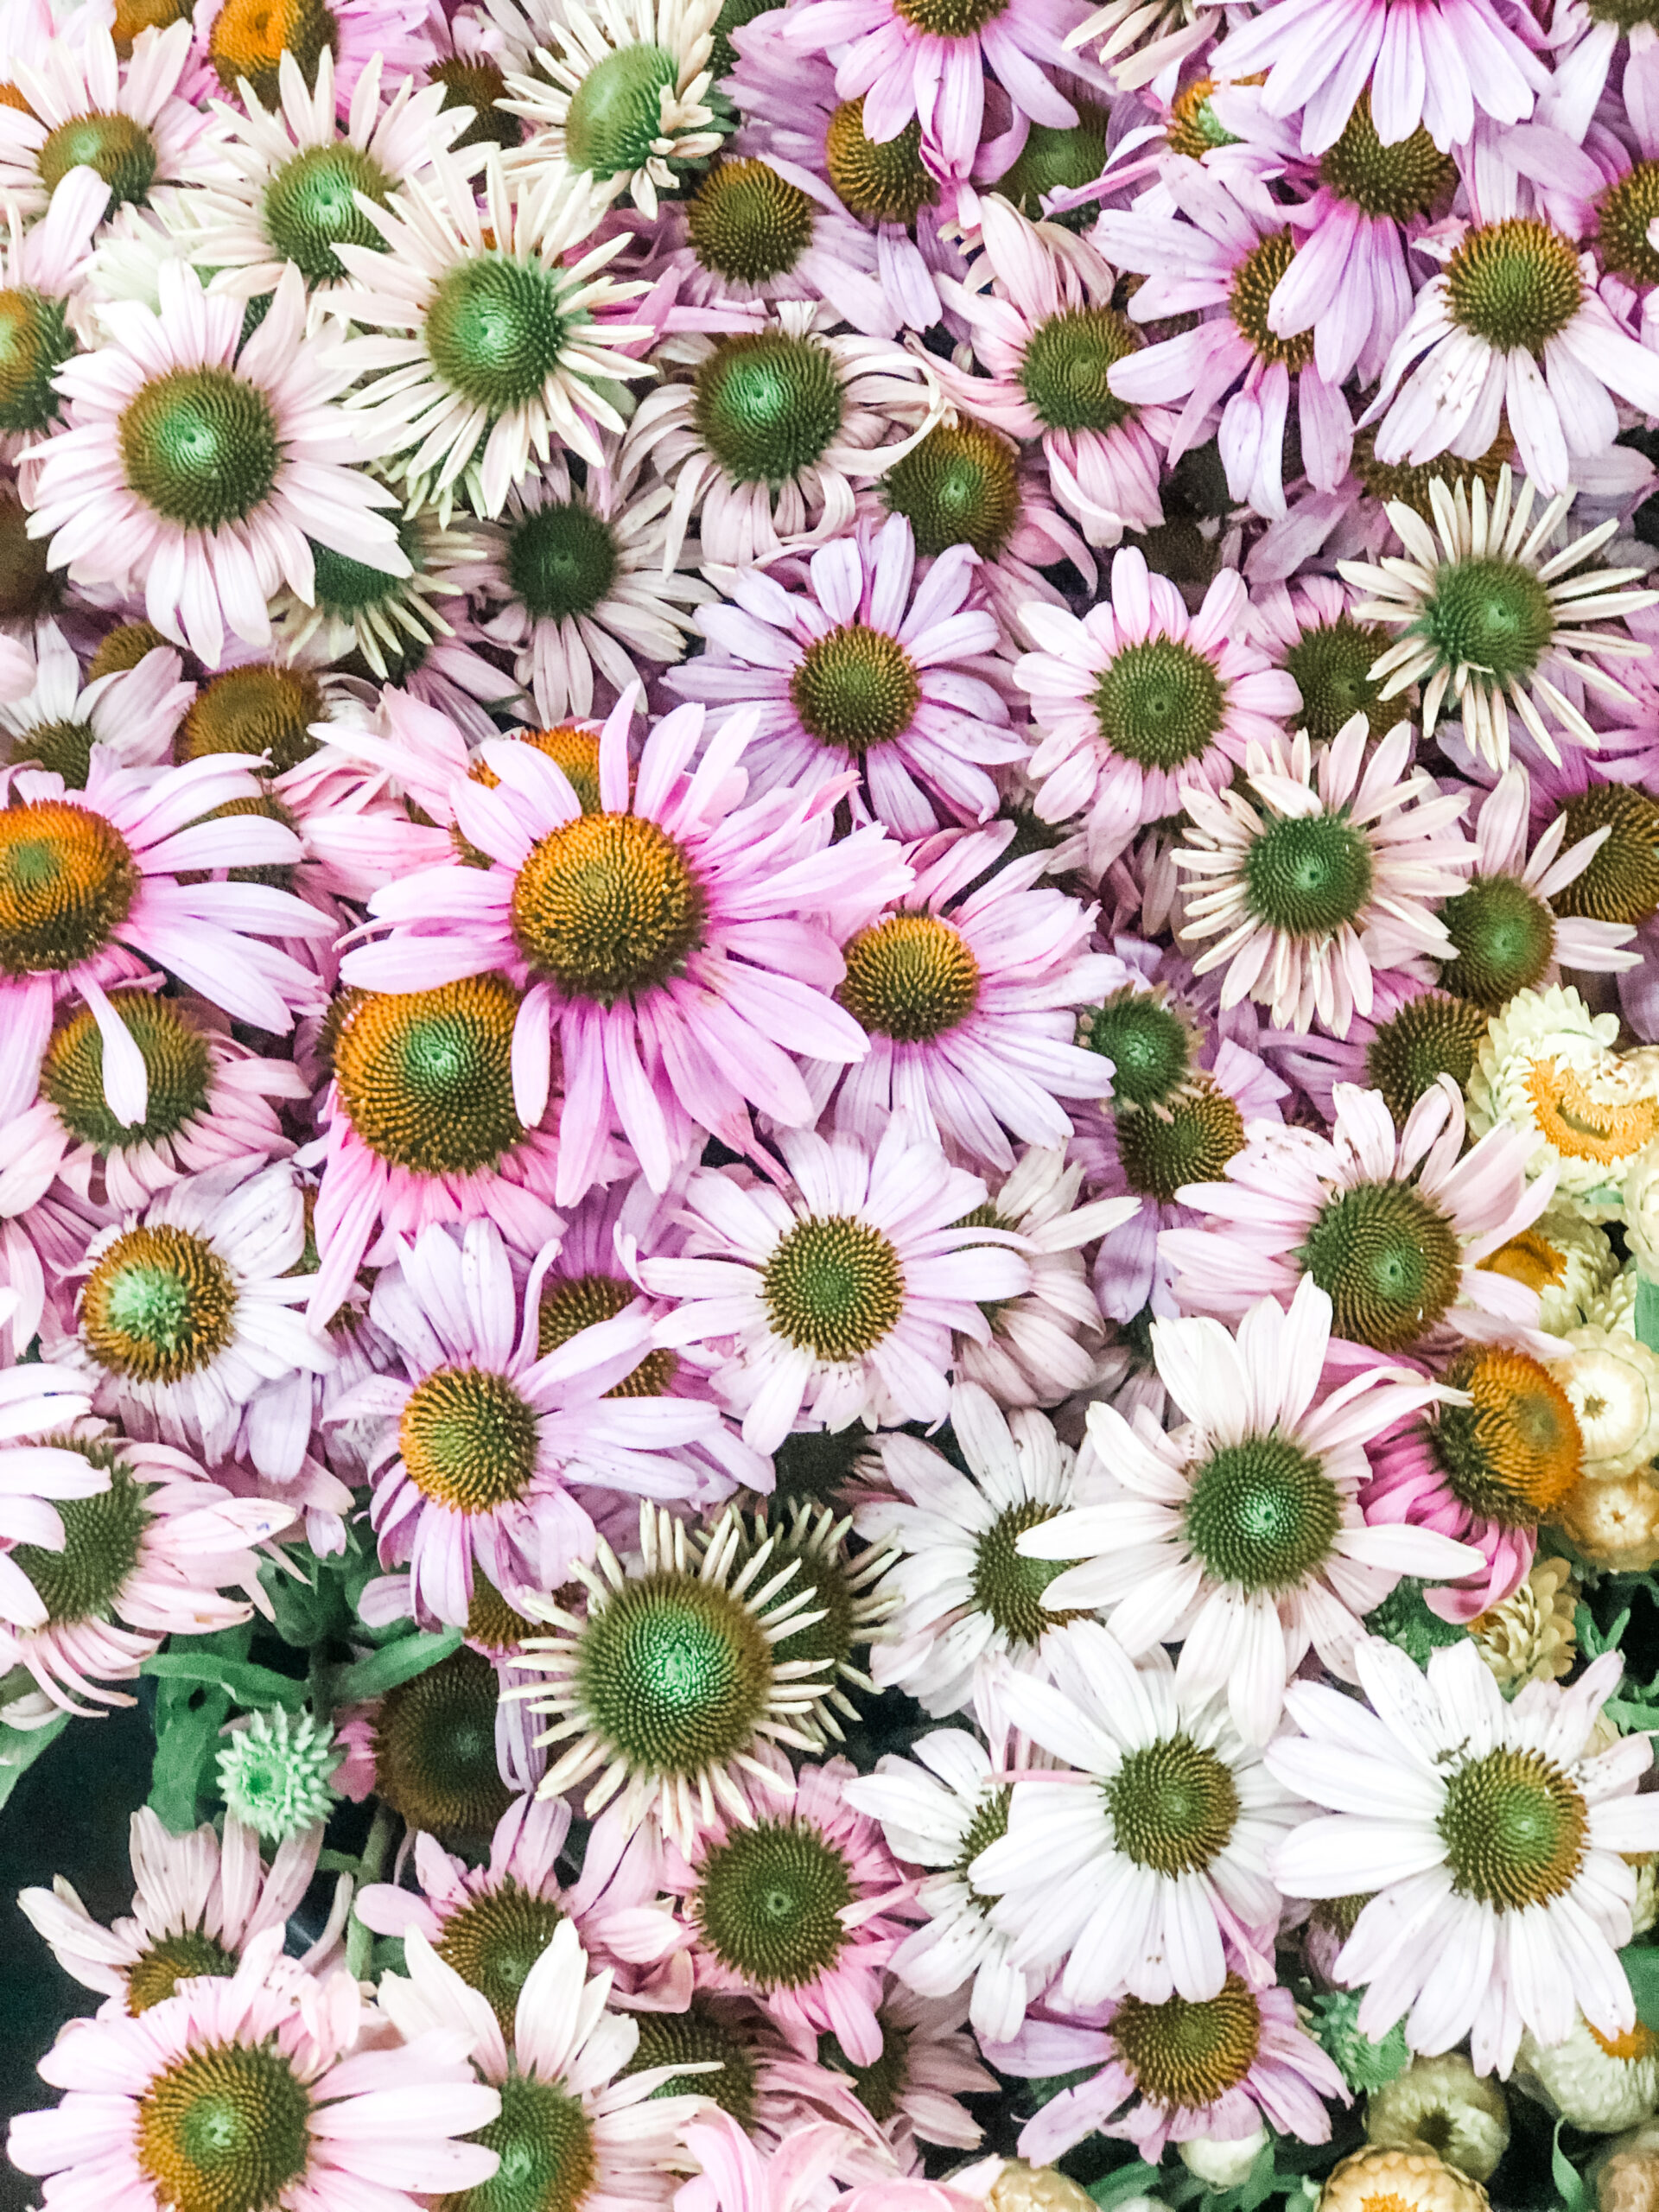 Pink Echinacea blooms snapped at The LA Flower Market by Tabitha Abercrombie of Winston & Main